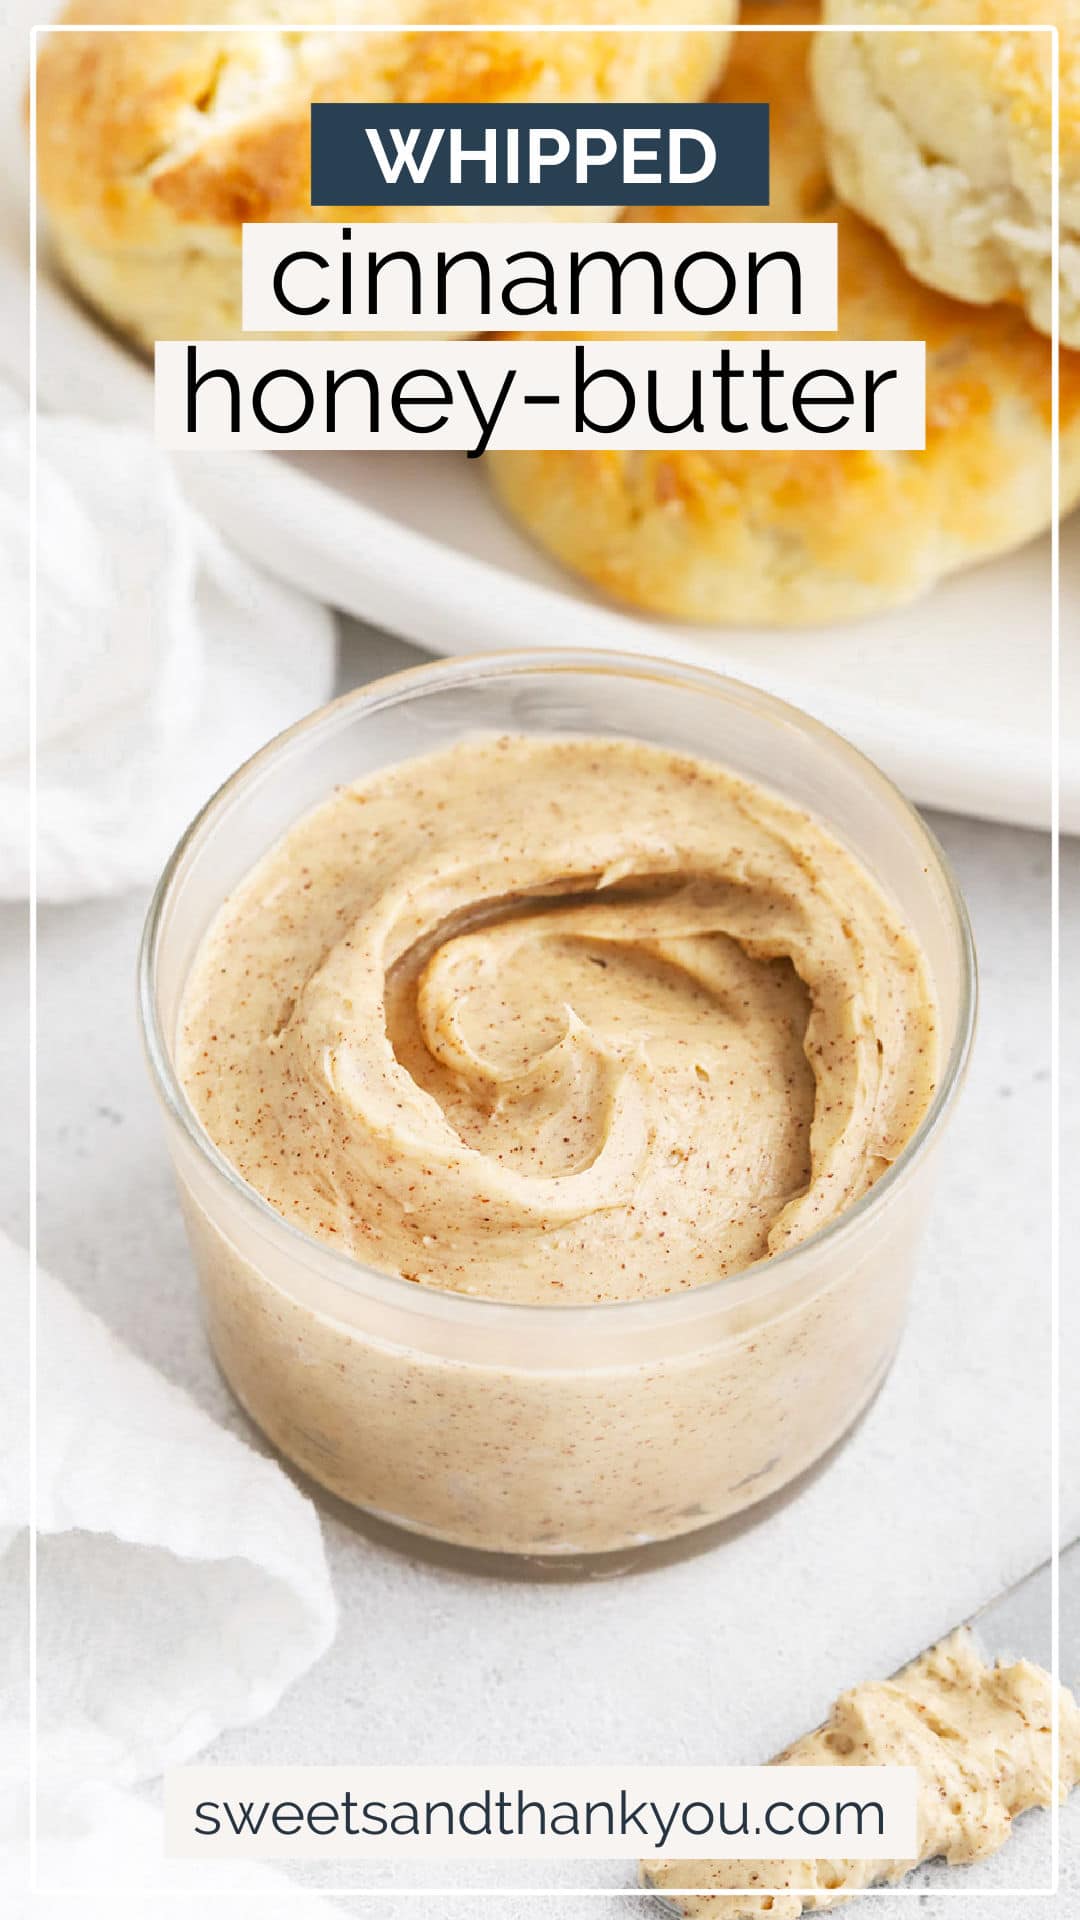 Whipped Cinnamon Butter - This easy cinnamon honey butter recipe adds gorgeous flavor to biscuits, rolls, toast, sweet potatoes & more! // Whipped Honey Butter Recipe // Texas Roadhouse Cinnamon Butter // Texas Roadhouse Cinnamon Honey Butter #cinnamonbutter #honeybutter #thanksgiving #butter